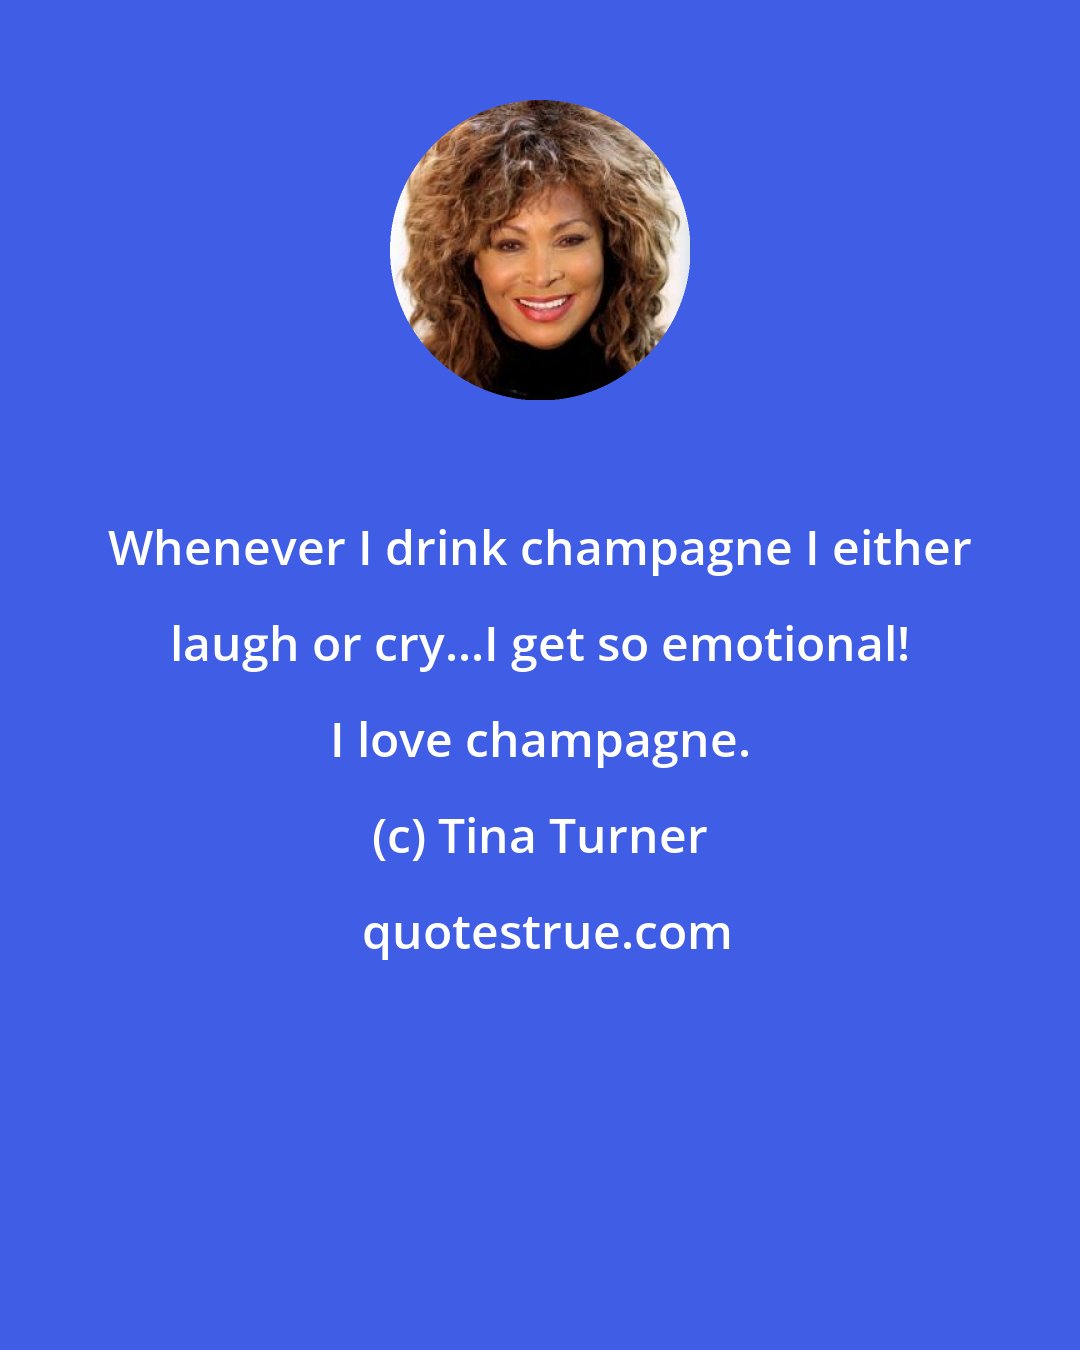 Tina Turner: Whenever I drink champagne I either laugh or cry...I get so emotional! I love champagne.